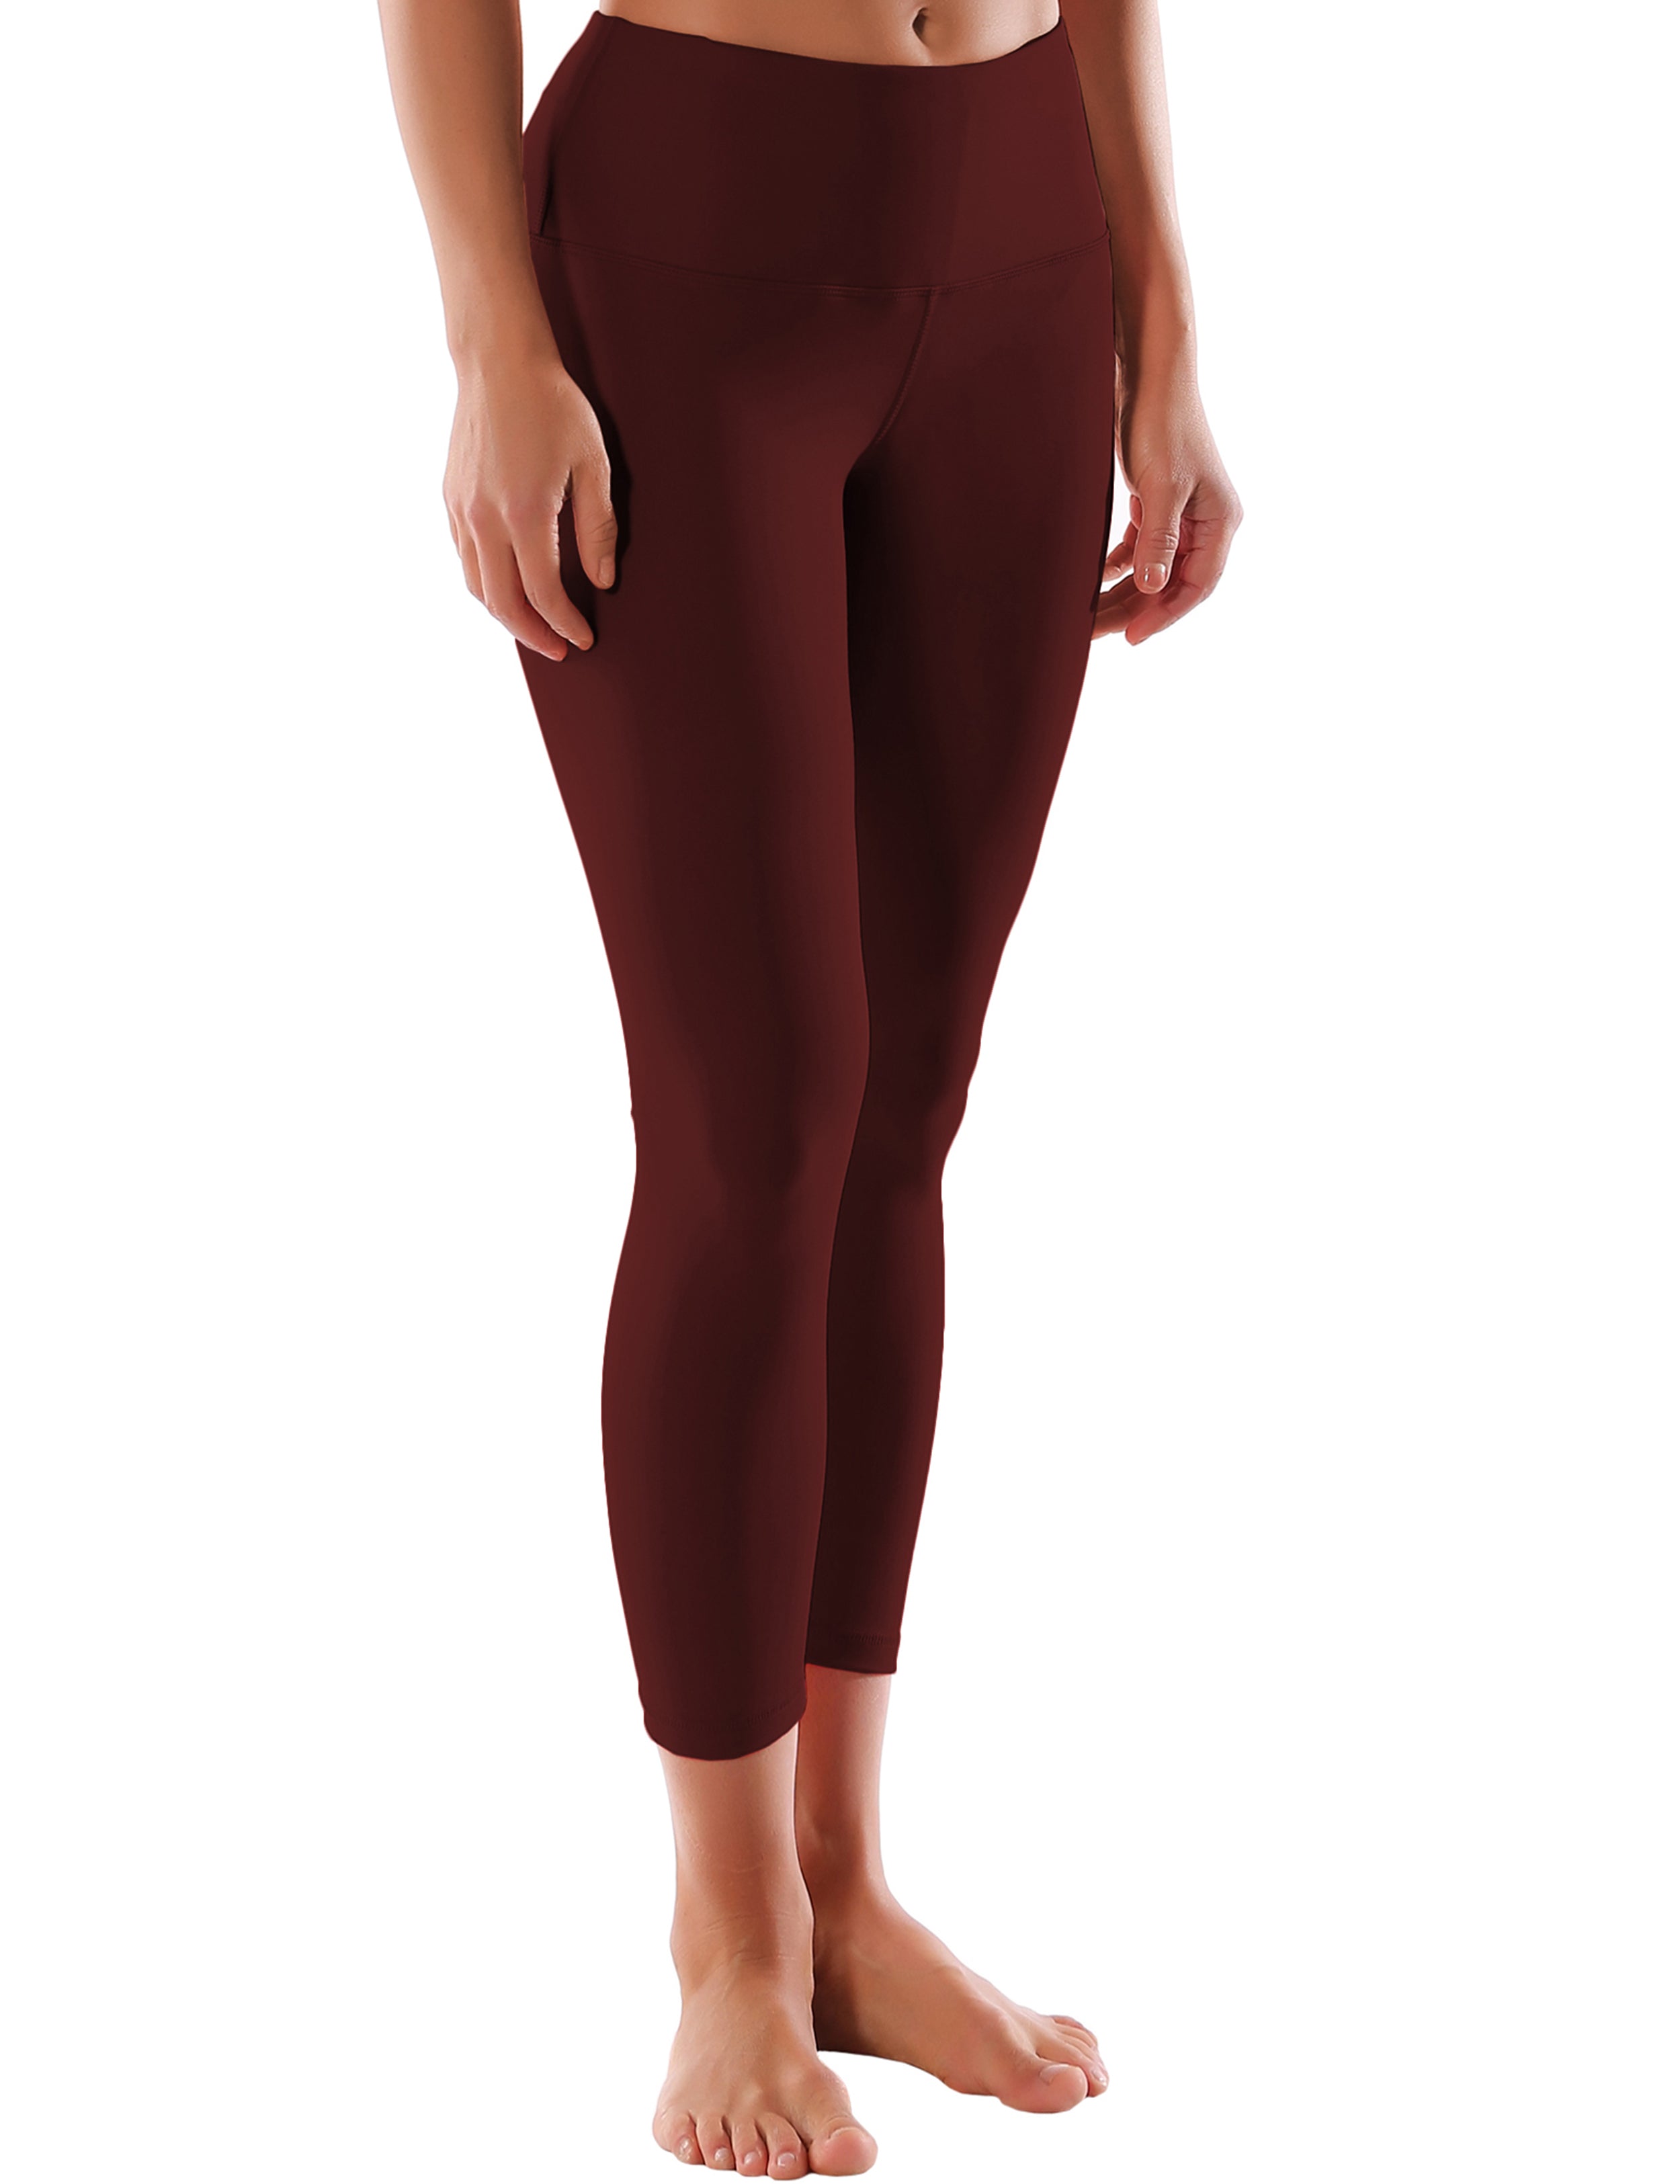 22" High Waist Crop Tight Capris mahoganymaroon 75%Nylon/25%Spandex Fabric doesn't attract lint easily 4-way stretch No see-through Moisture-wicking Tummy control Inner pocket